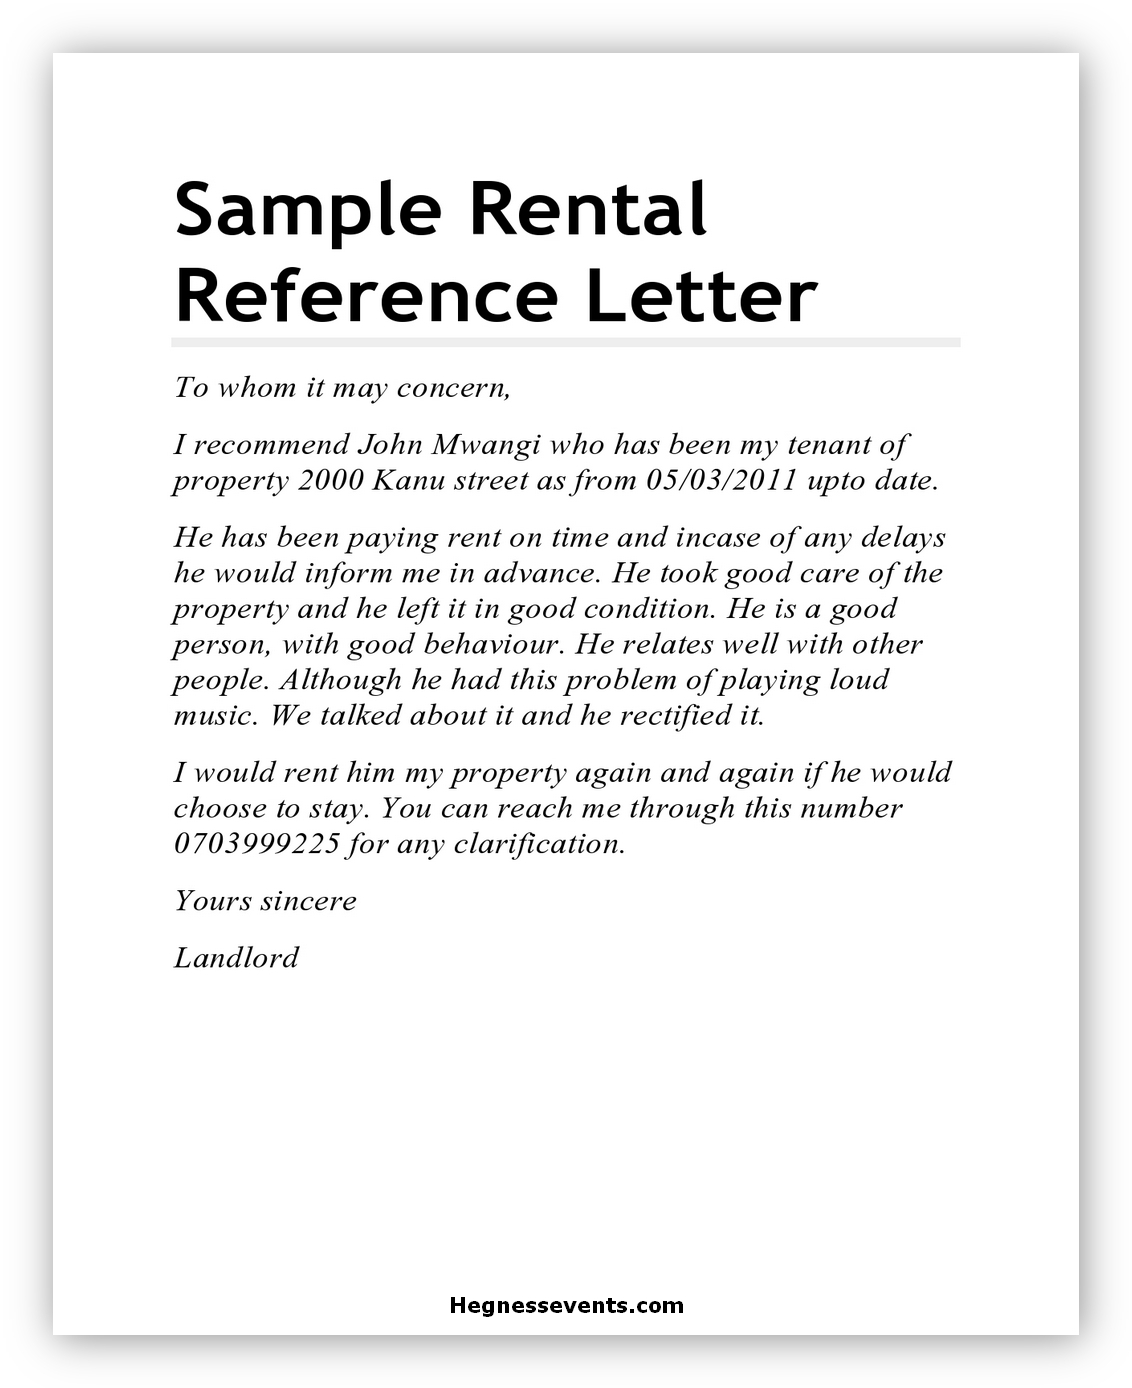 Character Reference Letter Sample For Rental